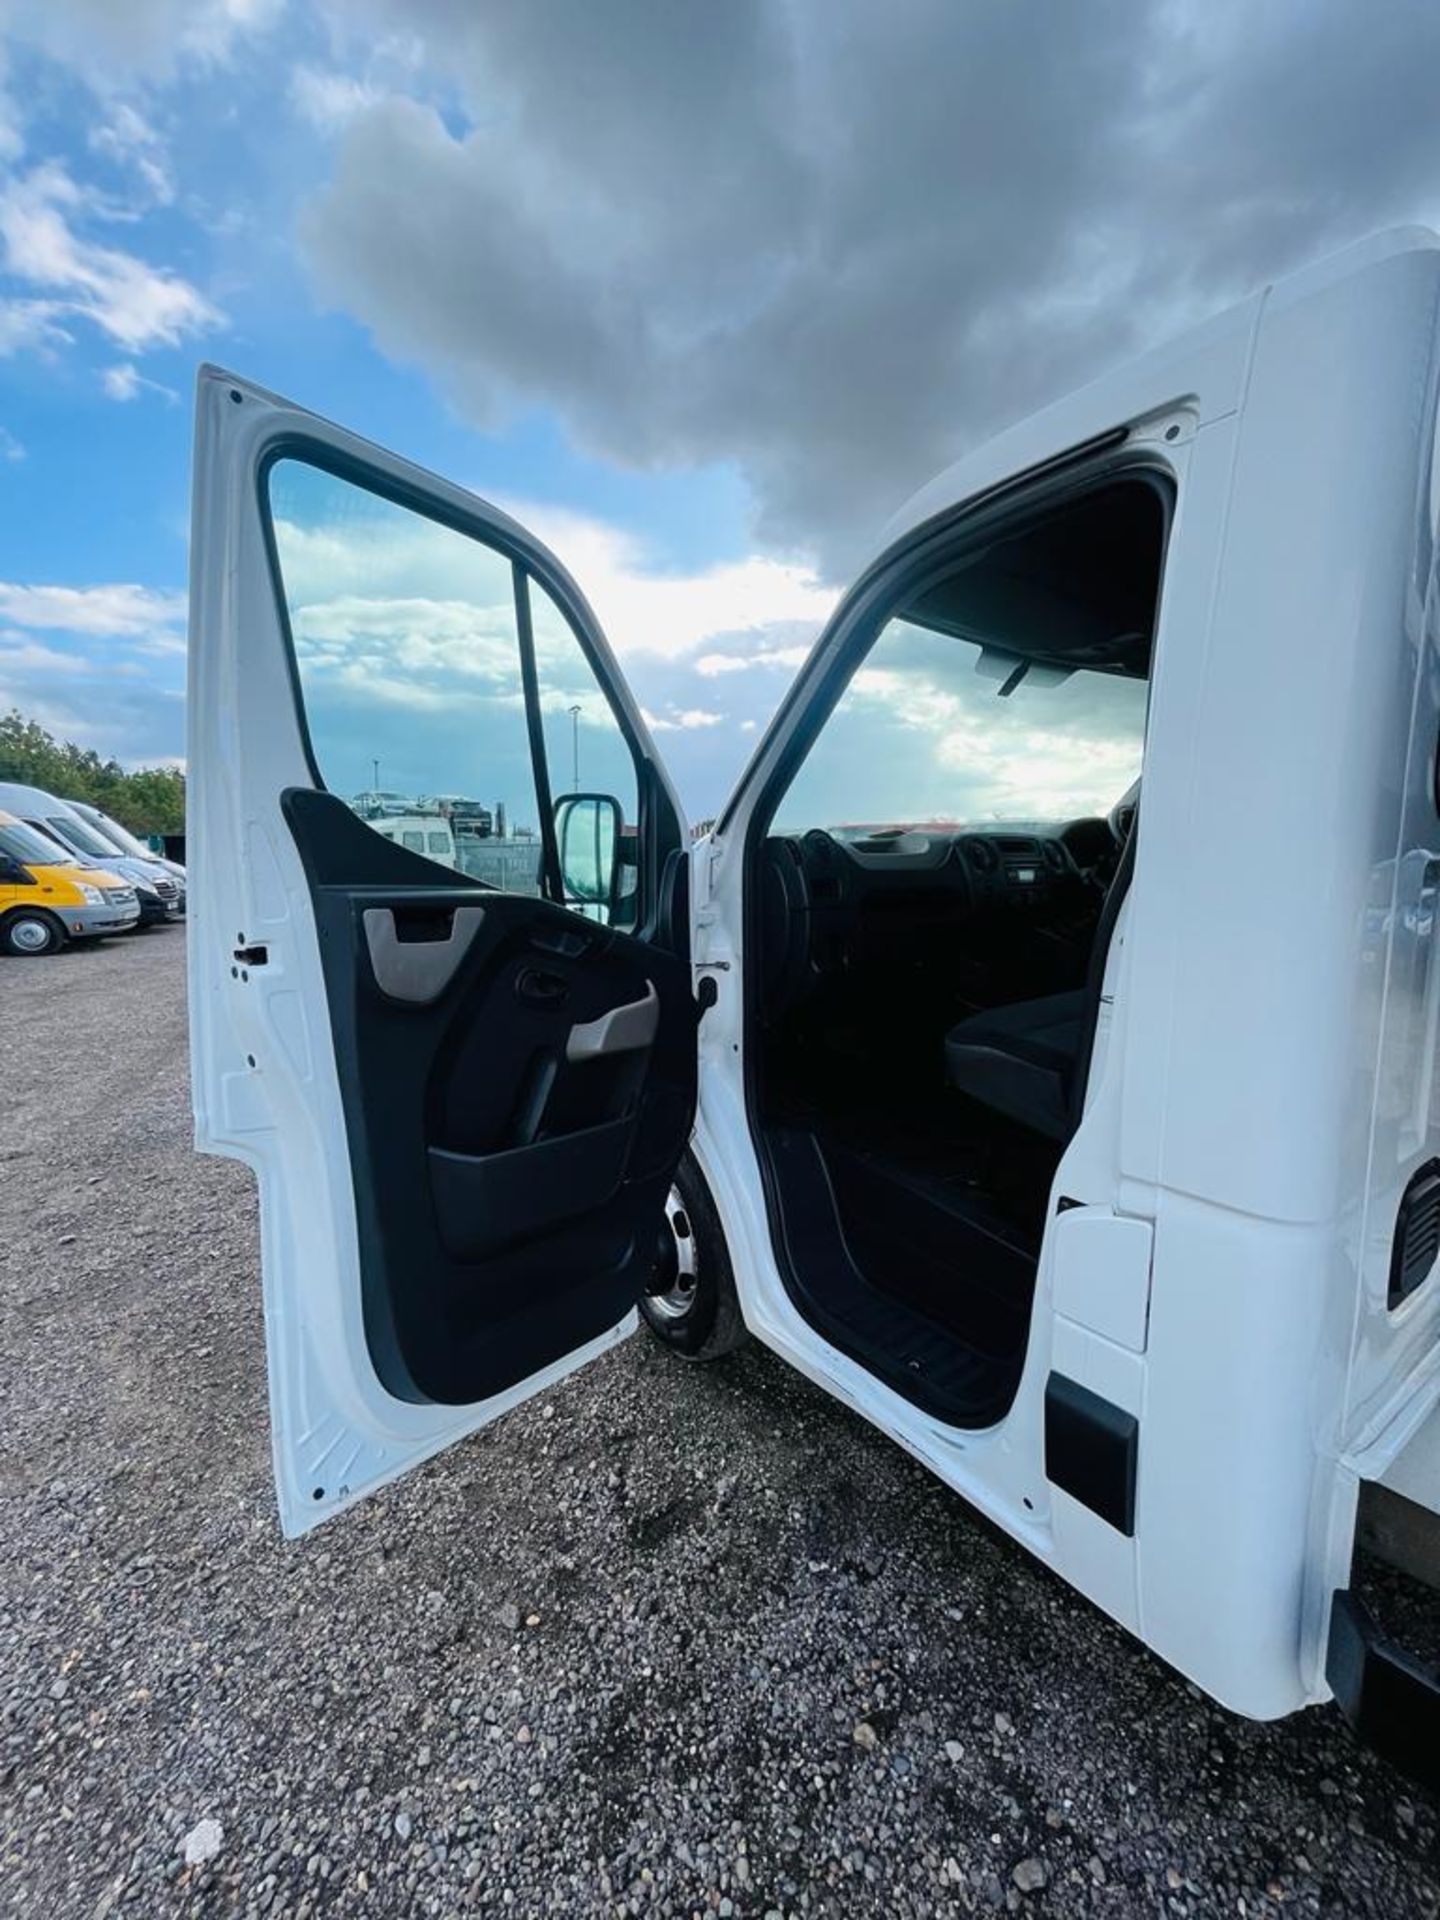 ** ON SALE ** Vauxhall Movano 2.3 CDTI RWD TRW R3500 2015 '15 Reg' Tipper - Only 110,779 Miles - Image 15 of 29